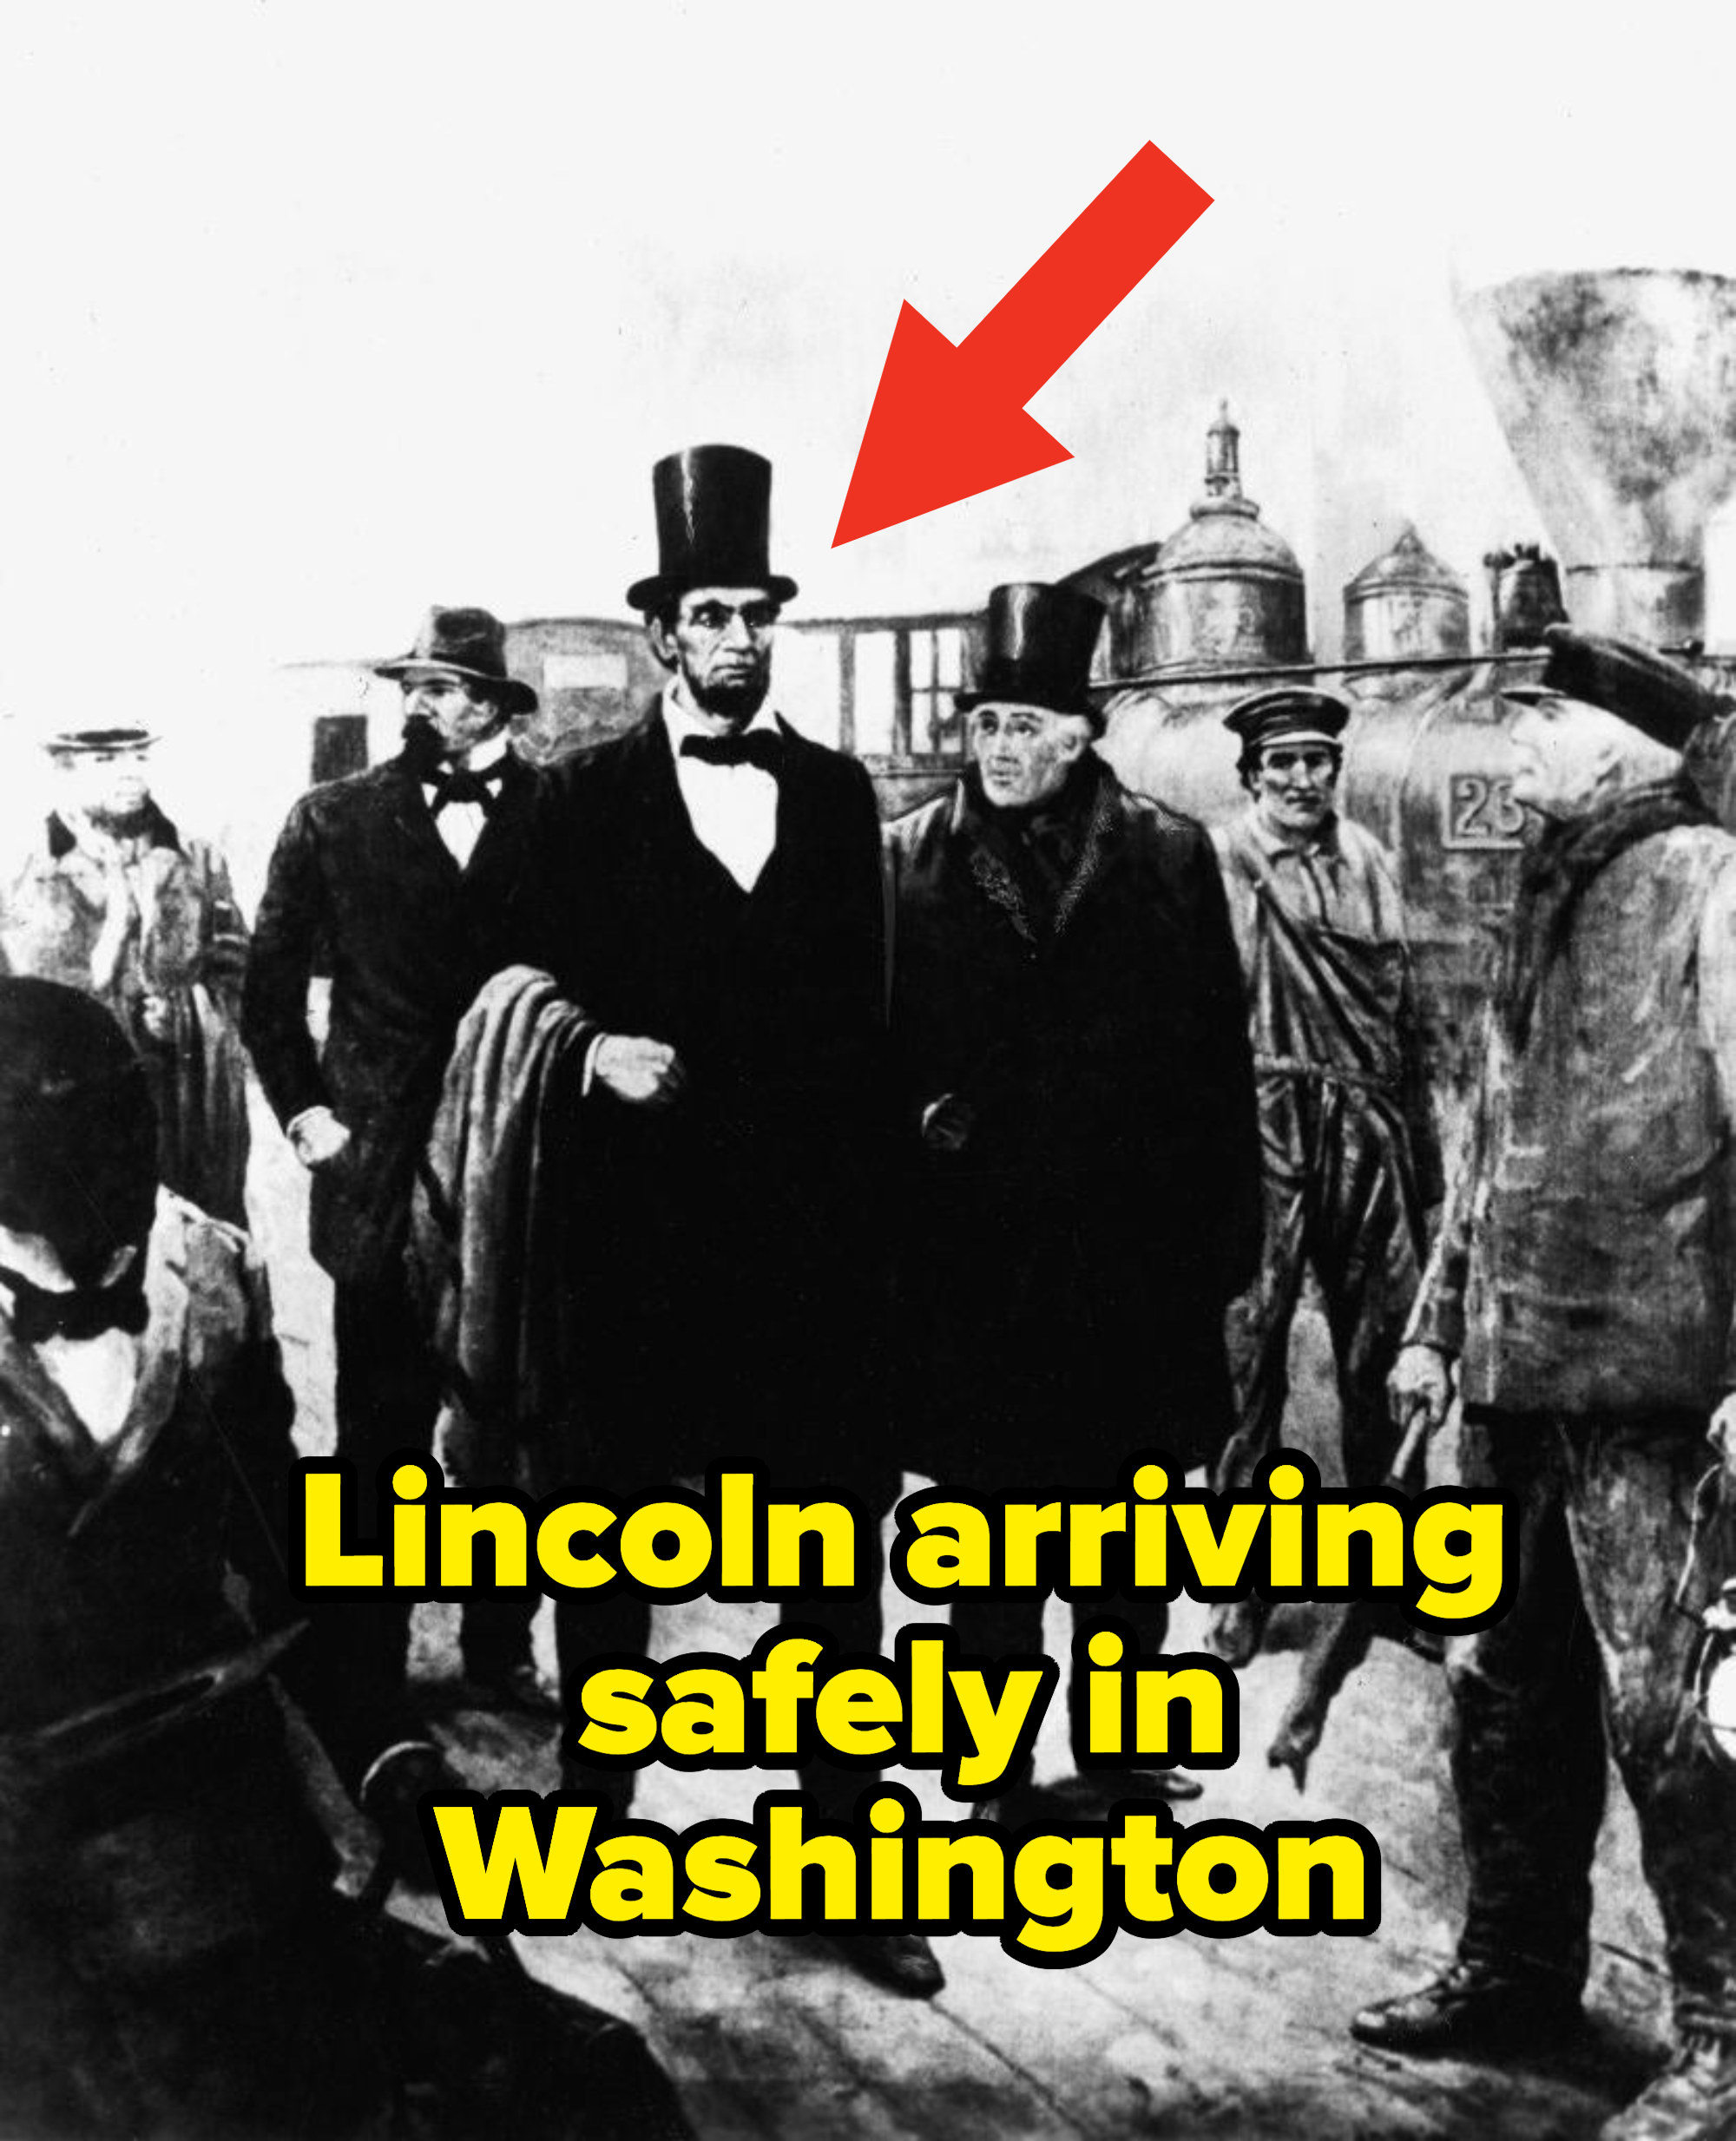 lincoln arriving safely in washington